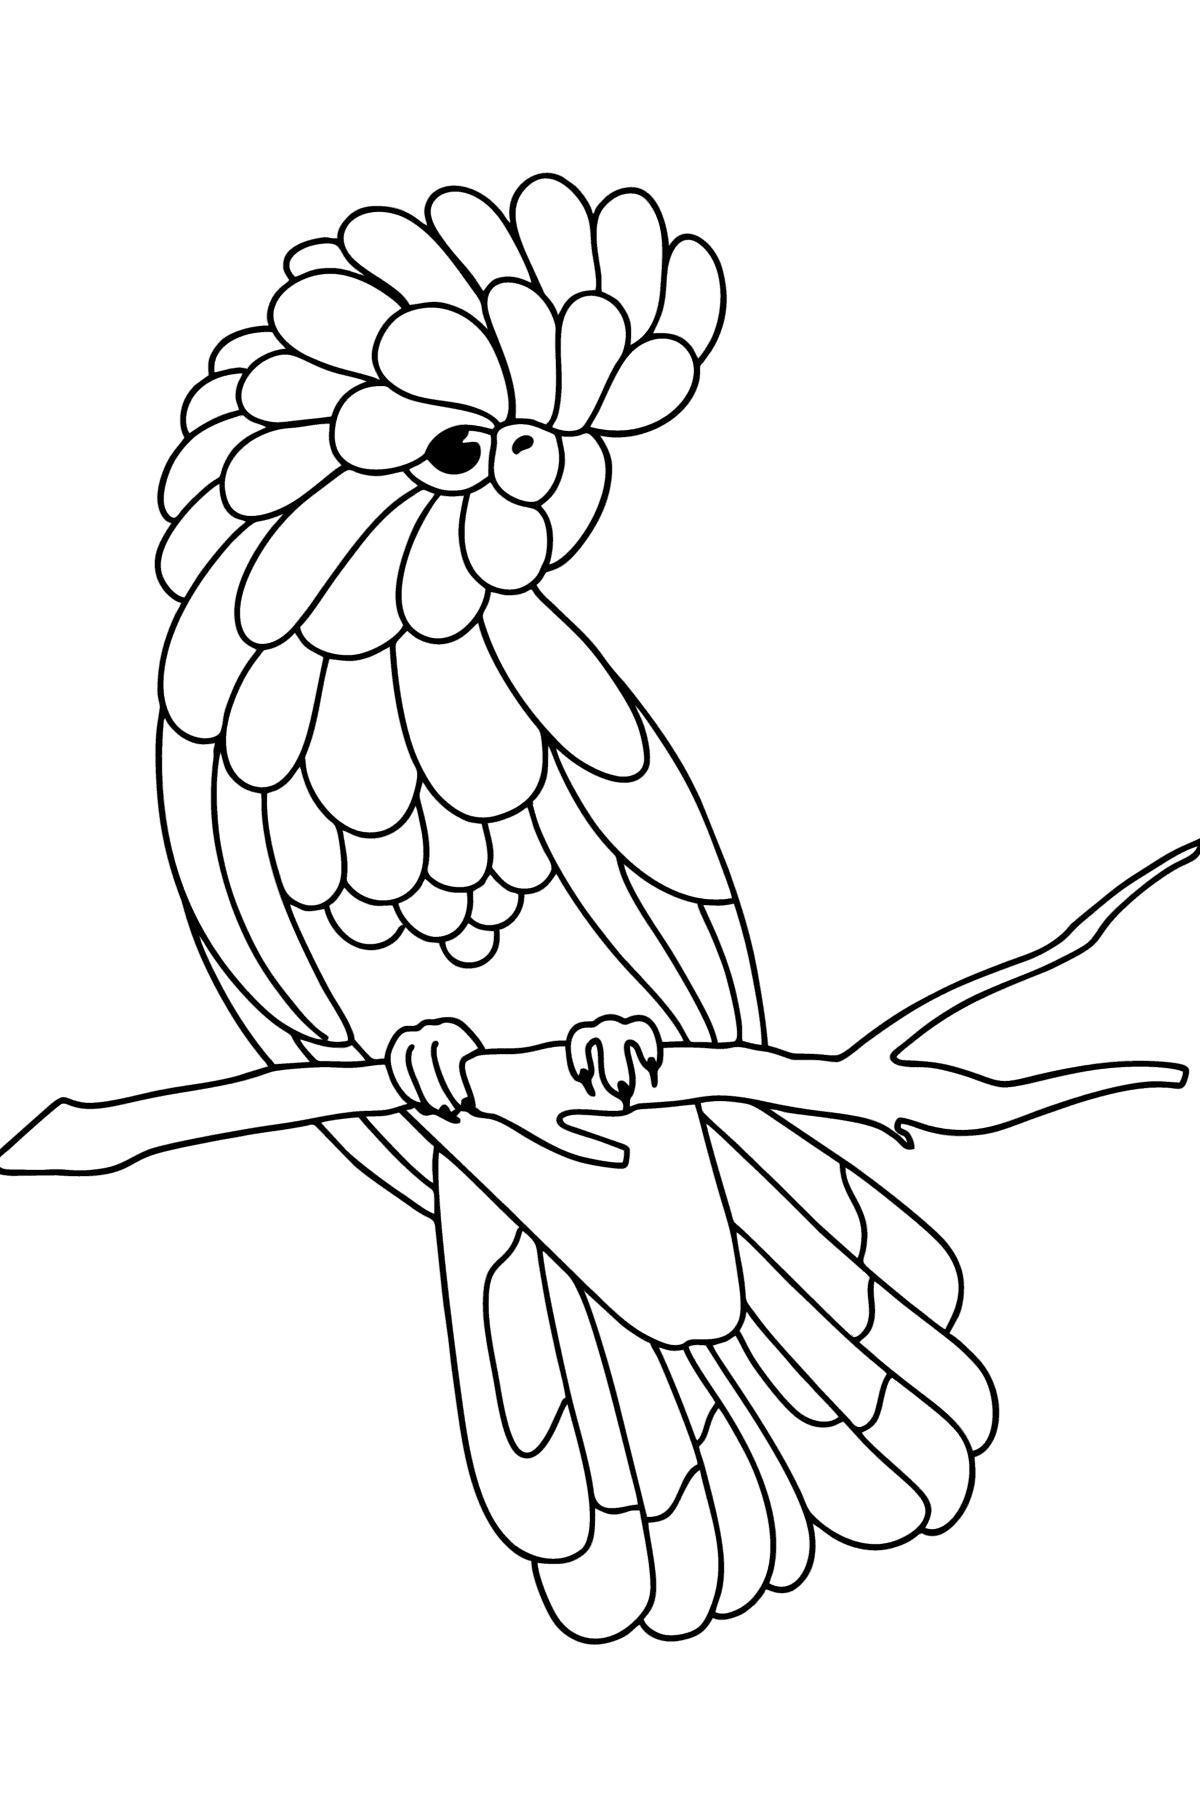 Black cockatoo сoloring page - Coloring Pages for Kids